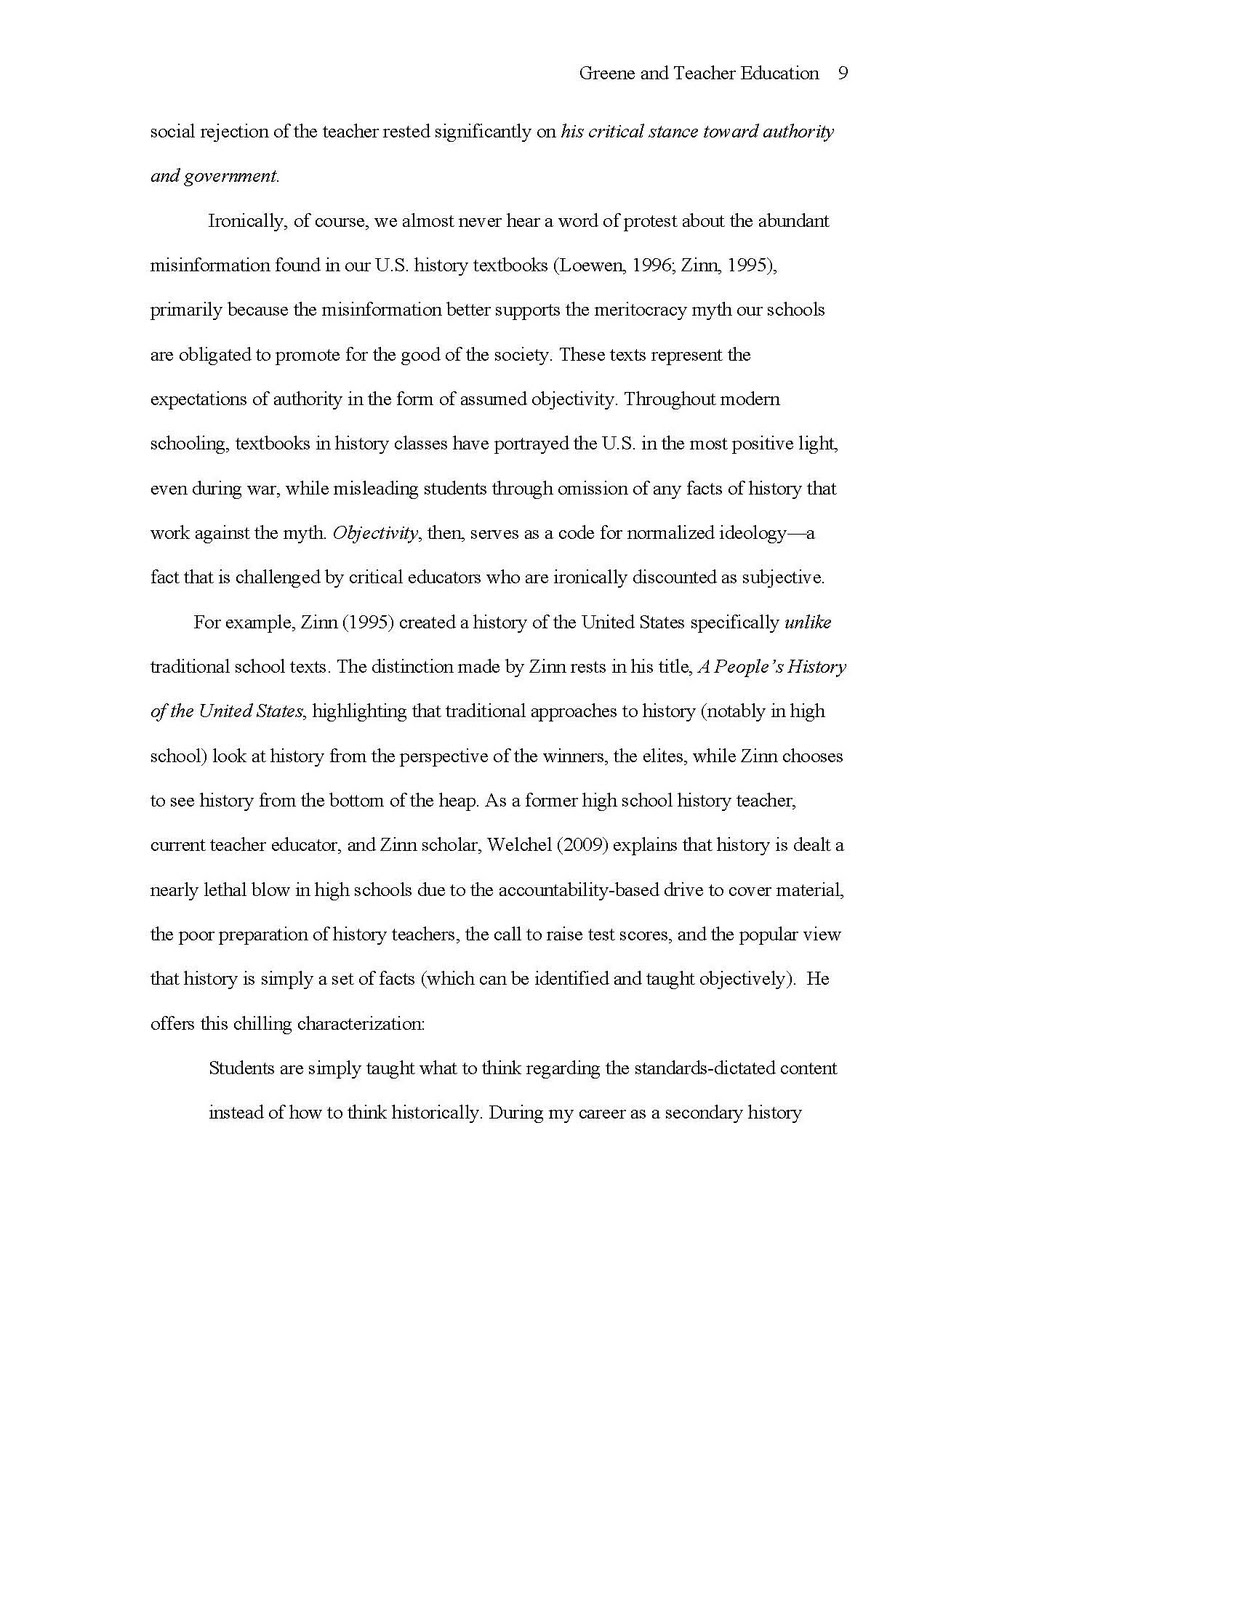 Download Apa Paper Template Word 2010 Free Software – Multimediautorrent Throughout Apa Template For Word 2010